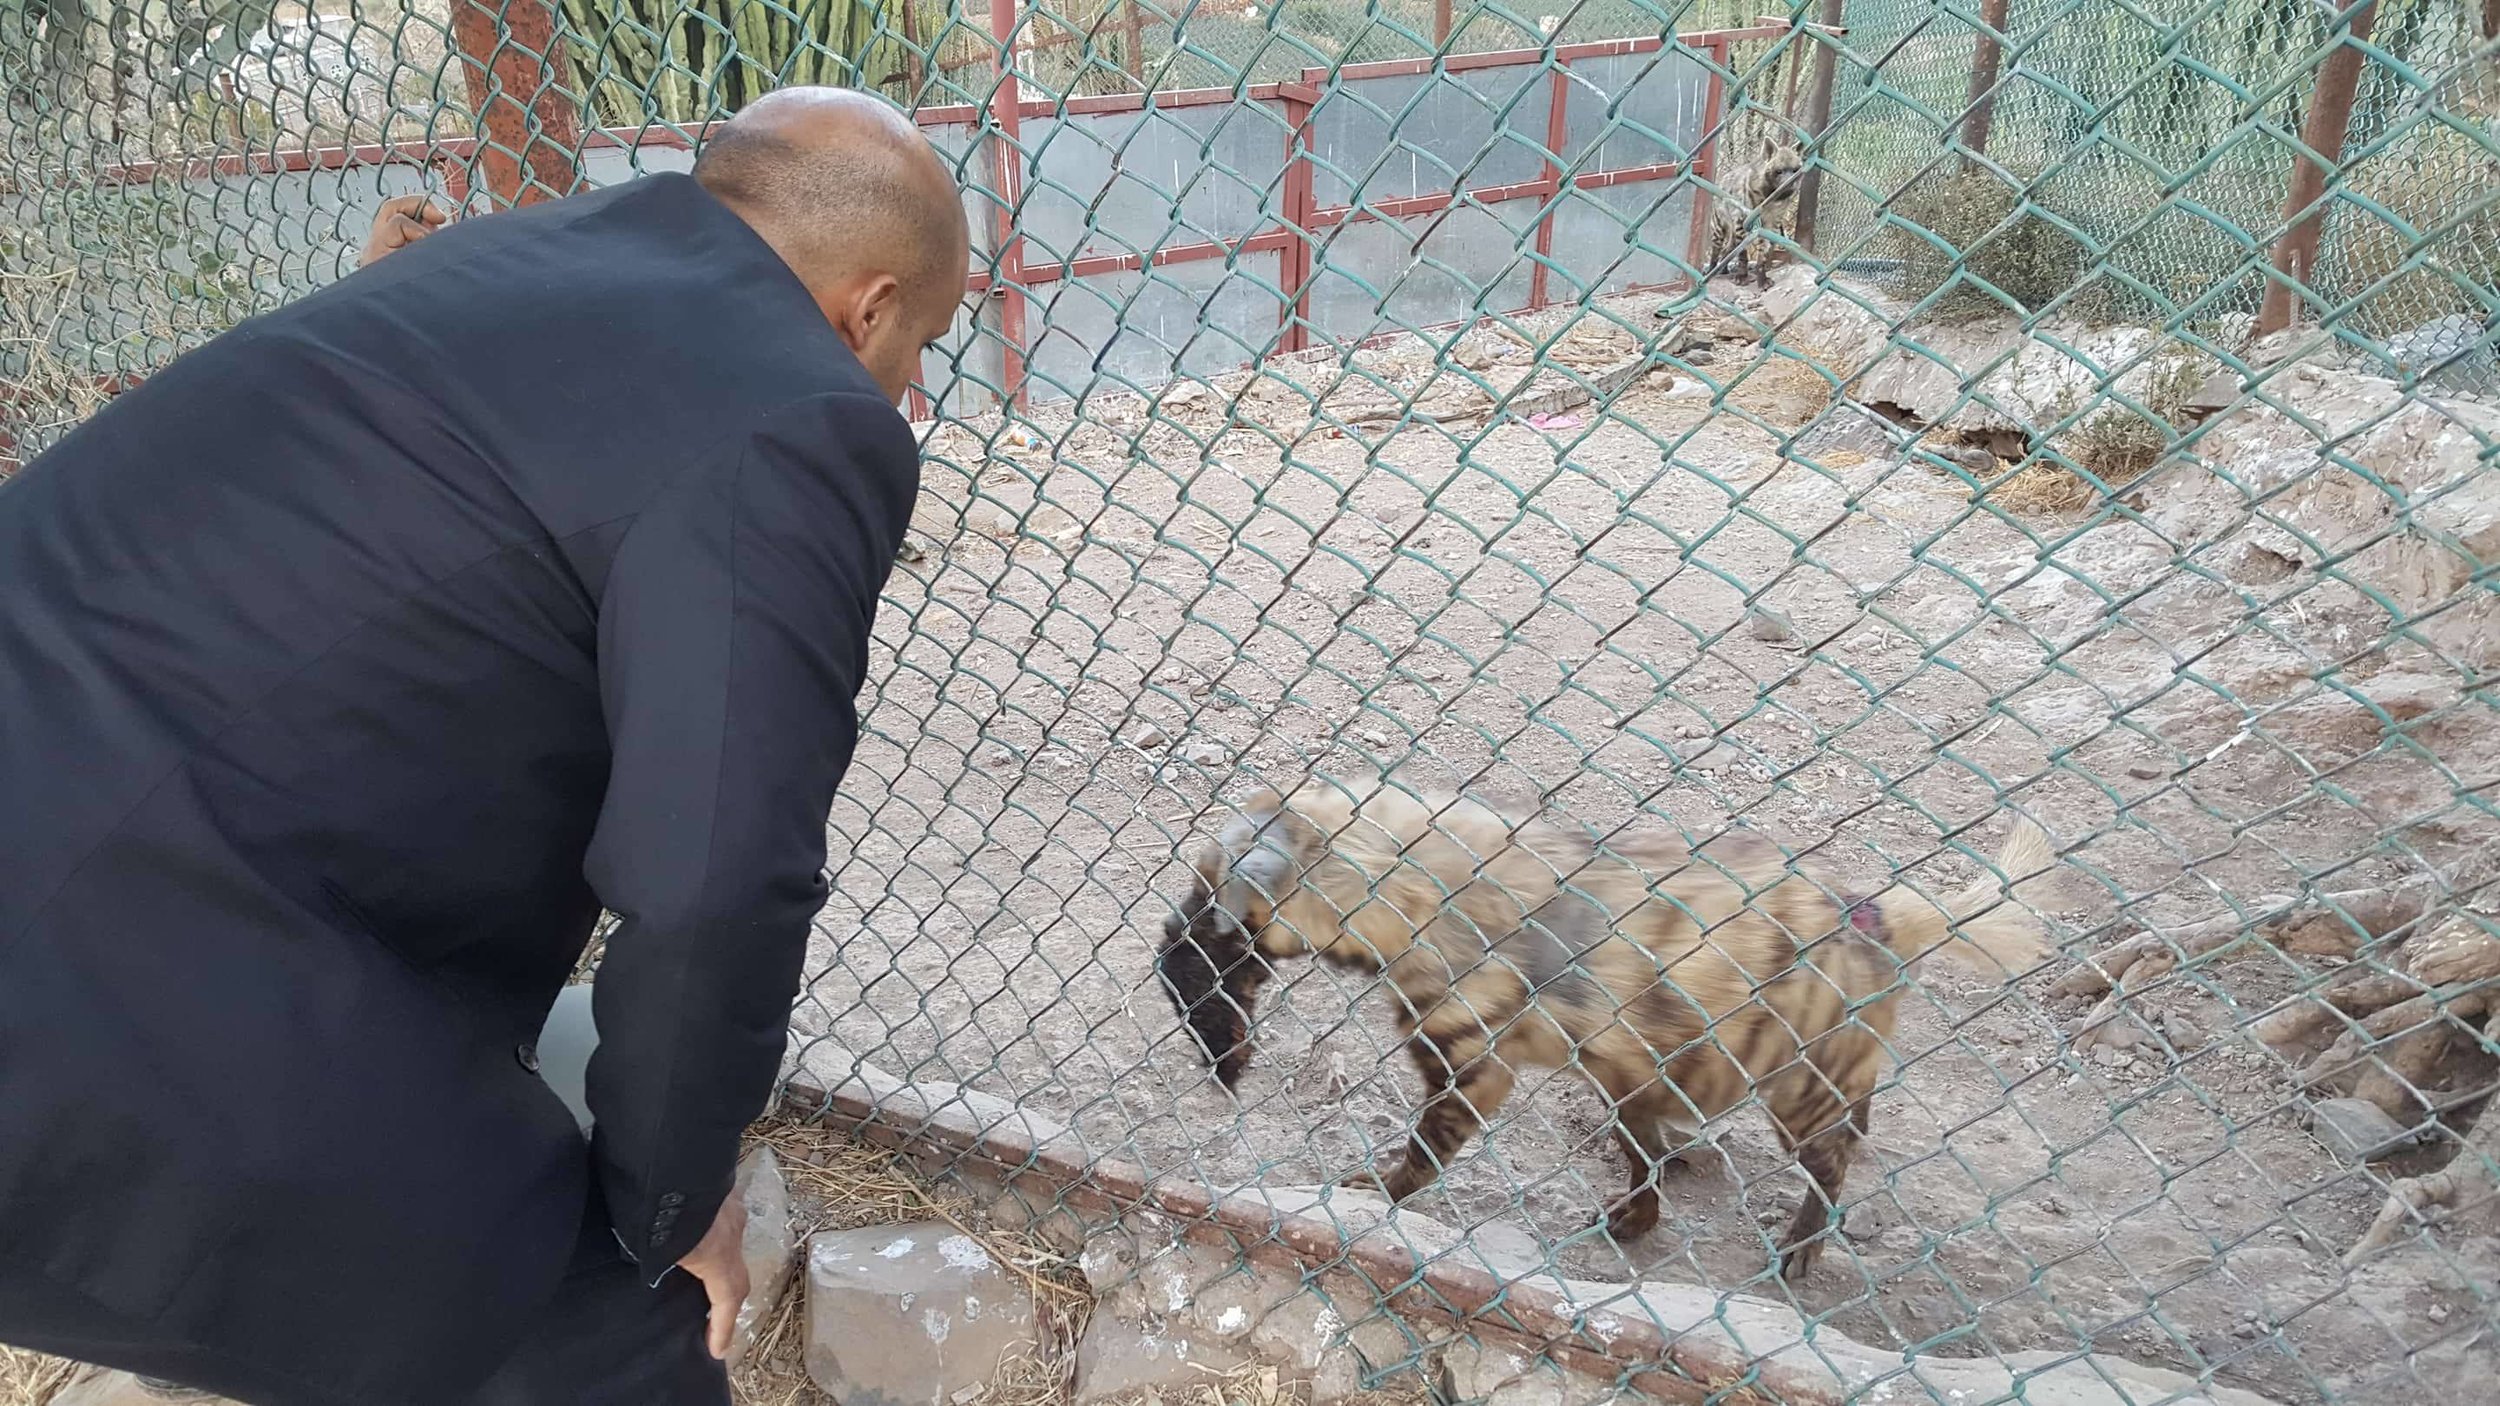 IBB ZOO 10 FEB 2018 MUAAD OBSERVING THE WOUNDED HYENA before treament for owapar.jpg